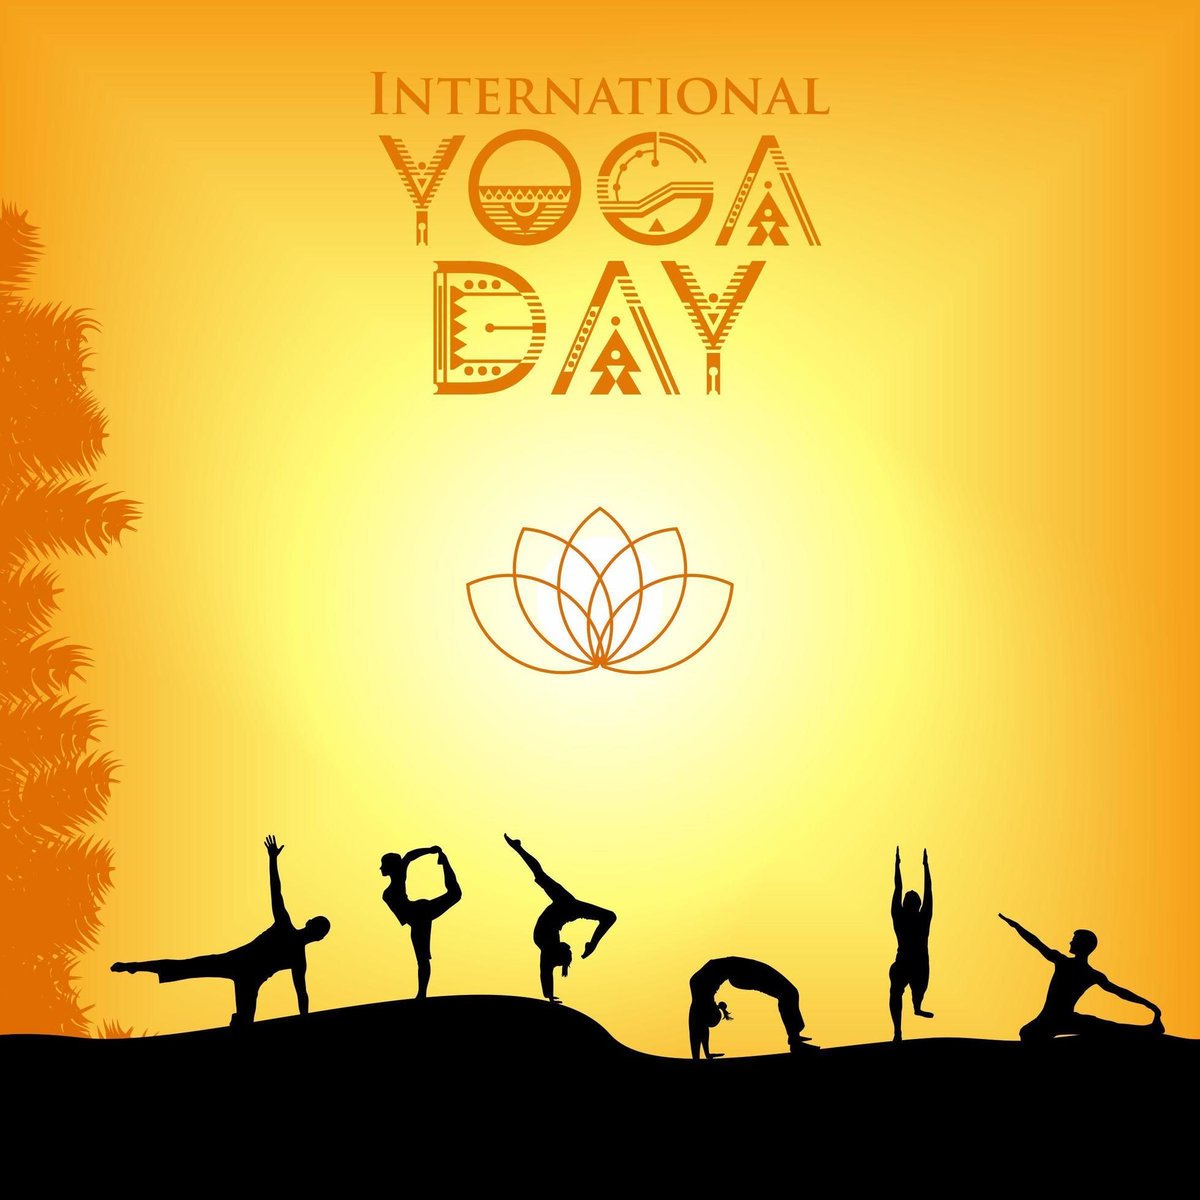 #vidyasiricollegeofpharmacy wishes everyone a very happy International Yoga Day.

Add years to your life and life to your years just by embracing yoga in your life.

#InternationalYogaDay #YogaForHealth #OceanRingofYoga